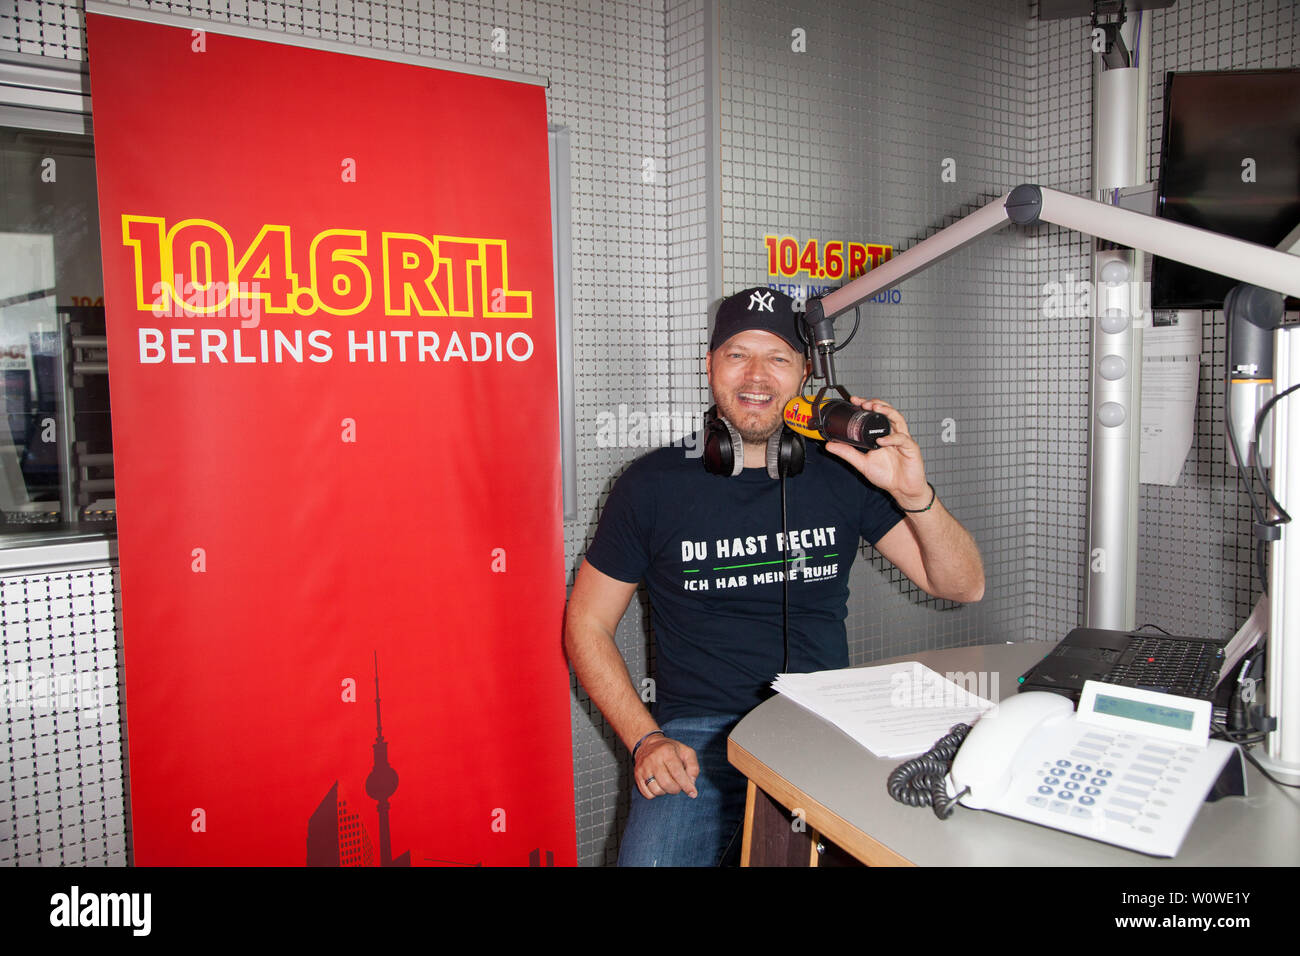 Rtl Studio High Resolution Stock Photography and Images - Alamy